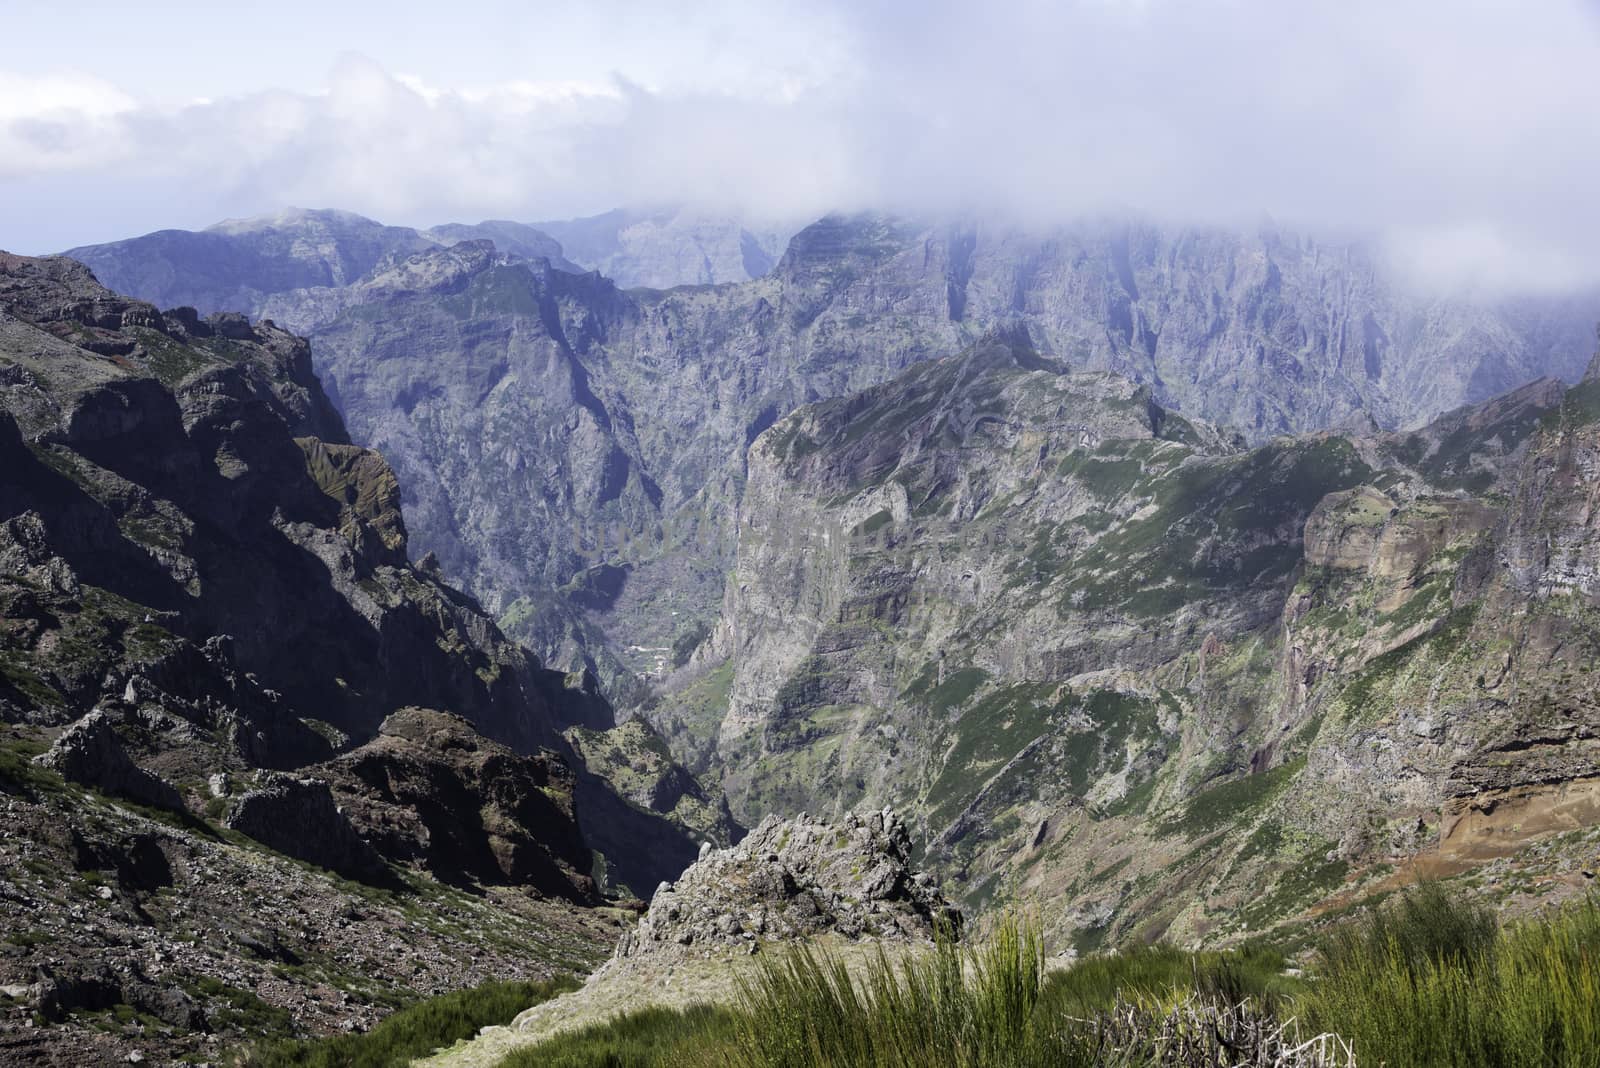 pico arieiro on madeira island in the clouds by compuinfoto